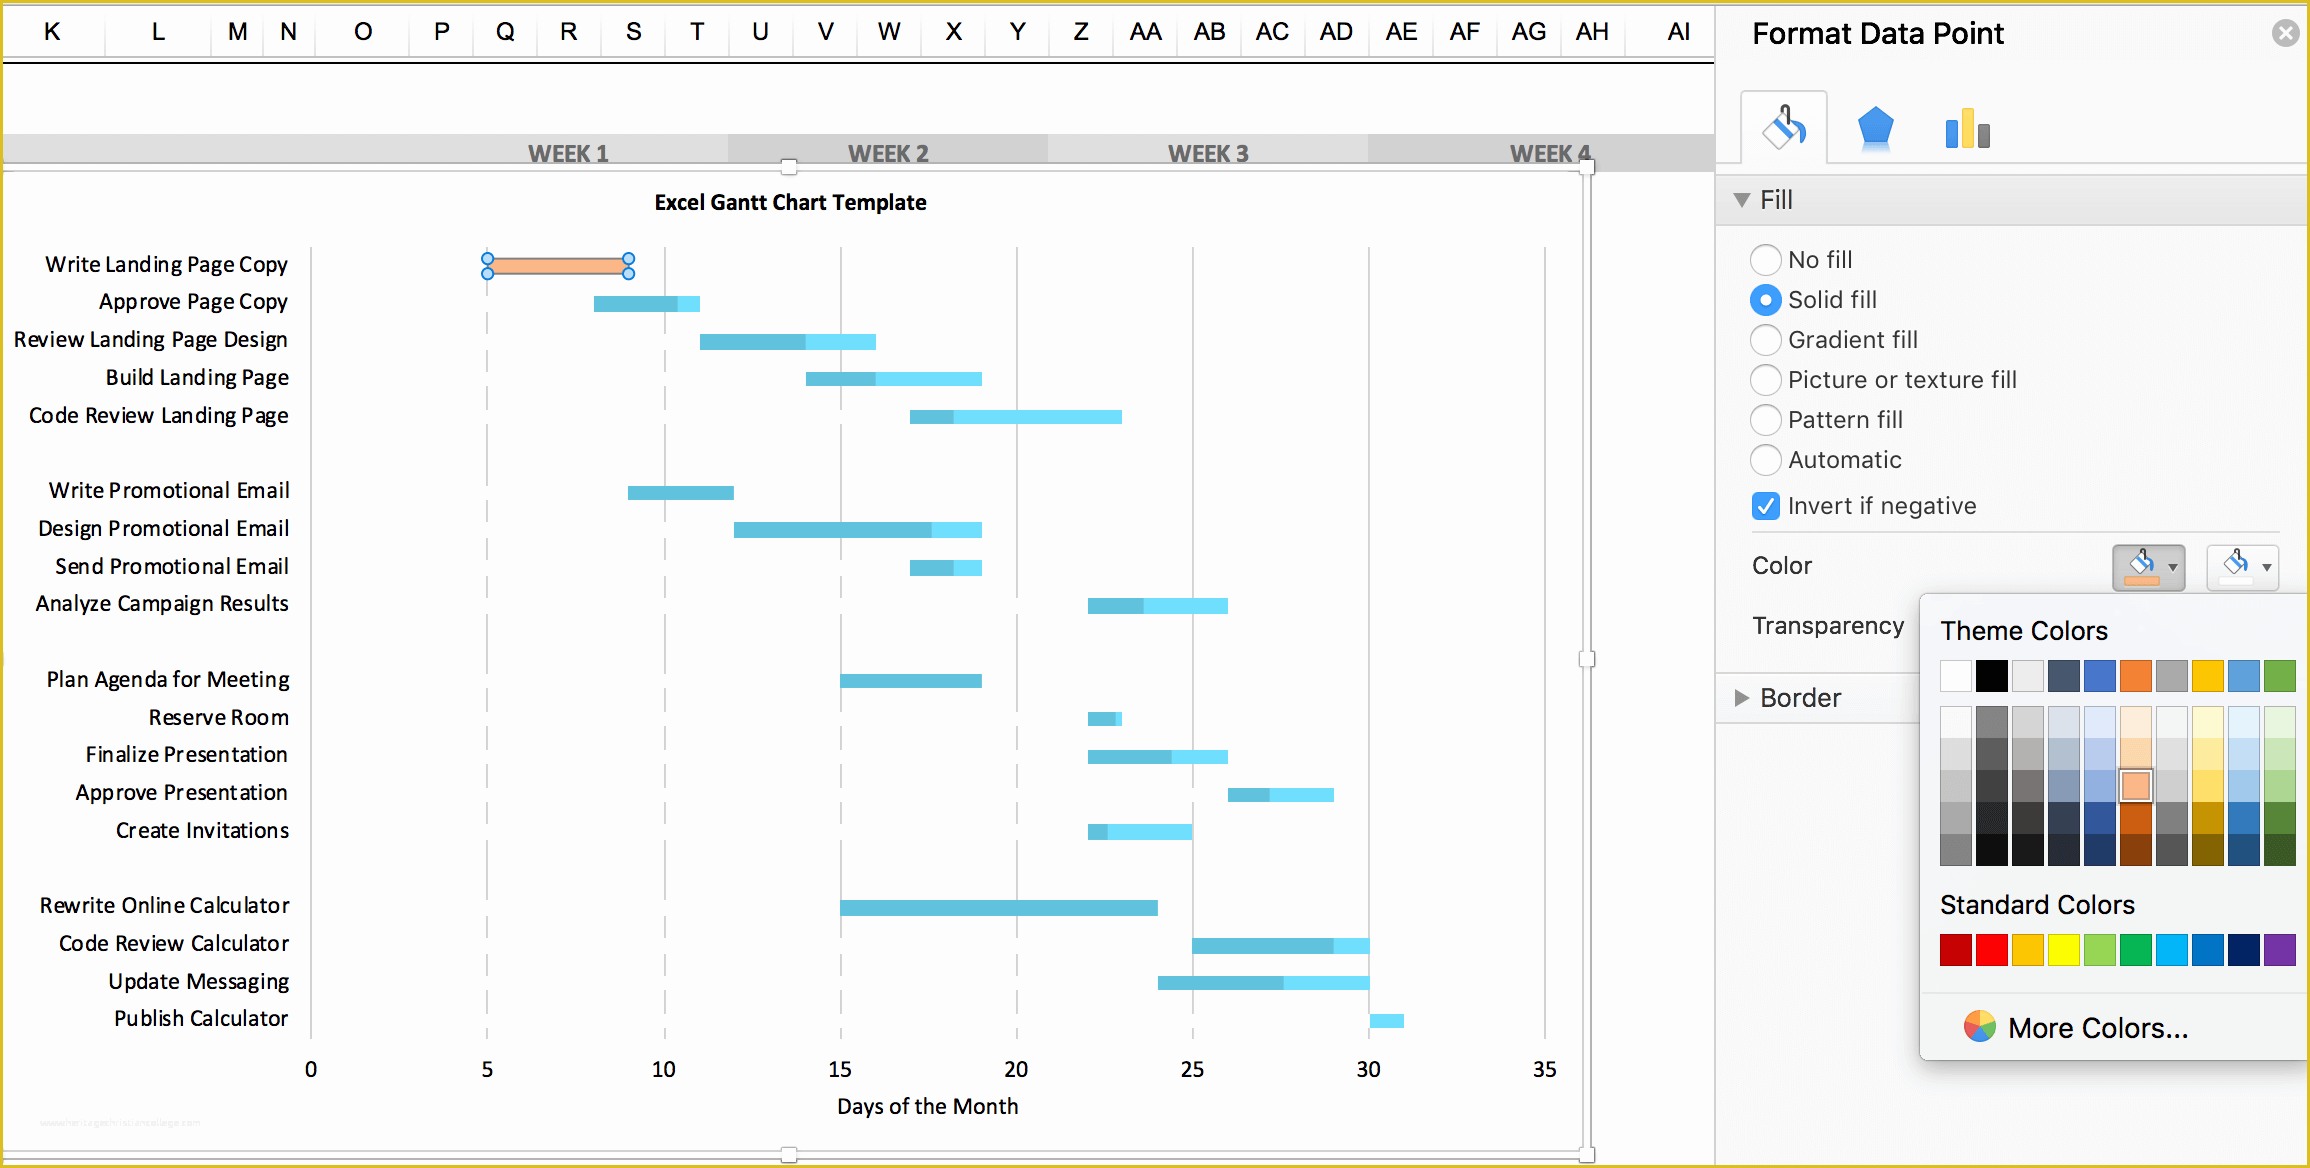 Free Excel Gantt Chart Template Of Free Gantt Chart Excel Template Download now